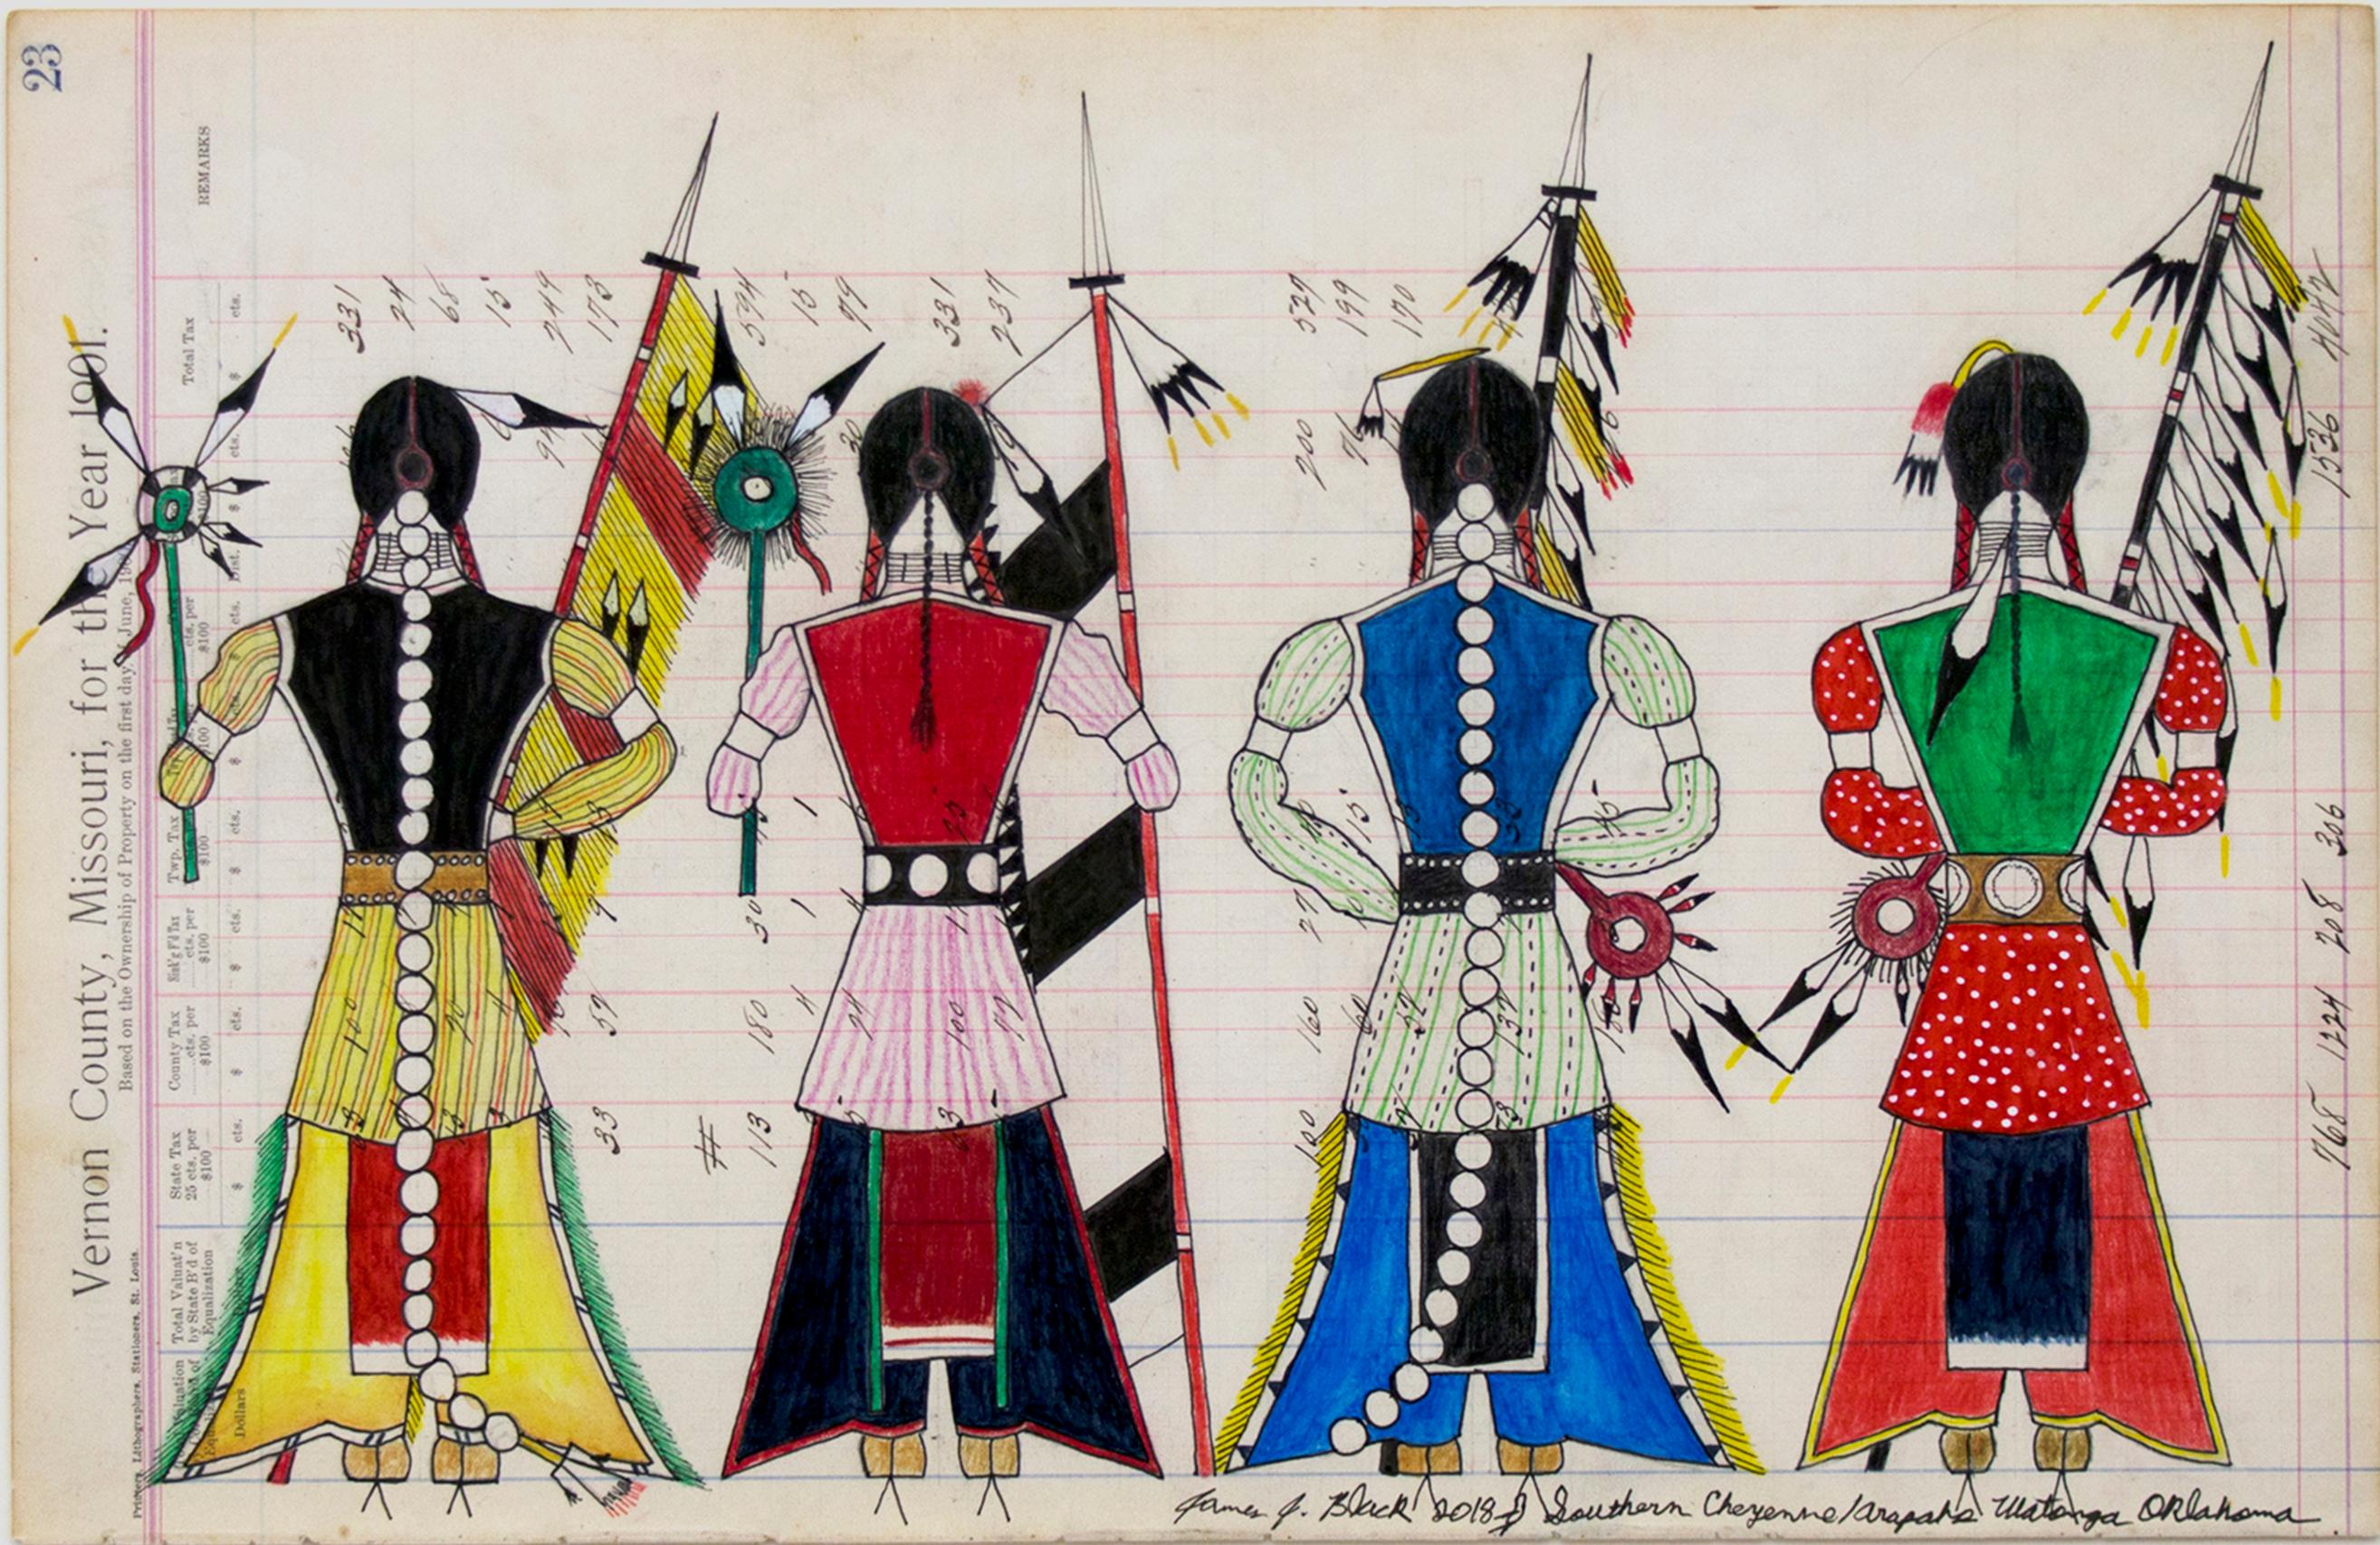 Original James black mixed media traditional style ledger drawing depicting Initiation Day for the Cheyenne Bowstring Society. Oil based colored pencil and ink on antique paper (part of a ledger marked 